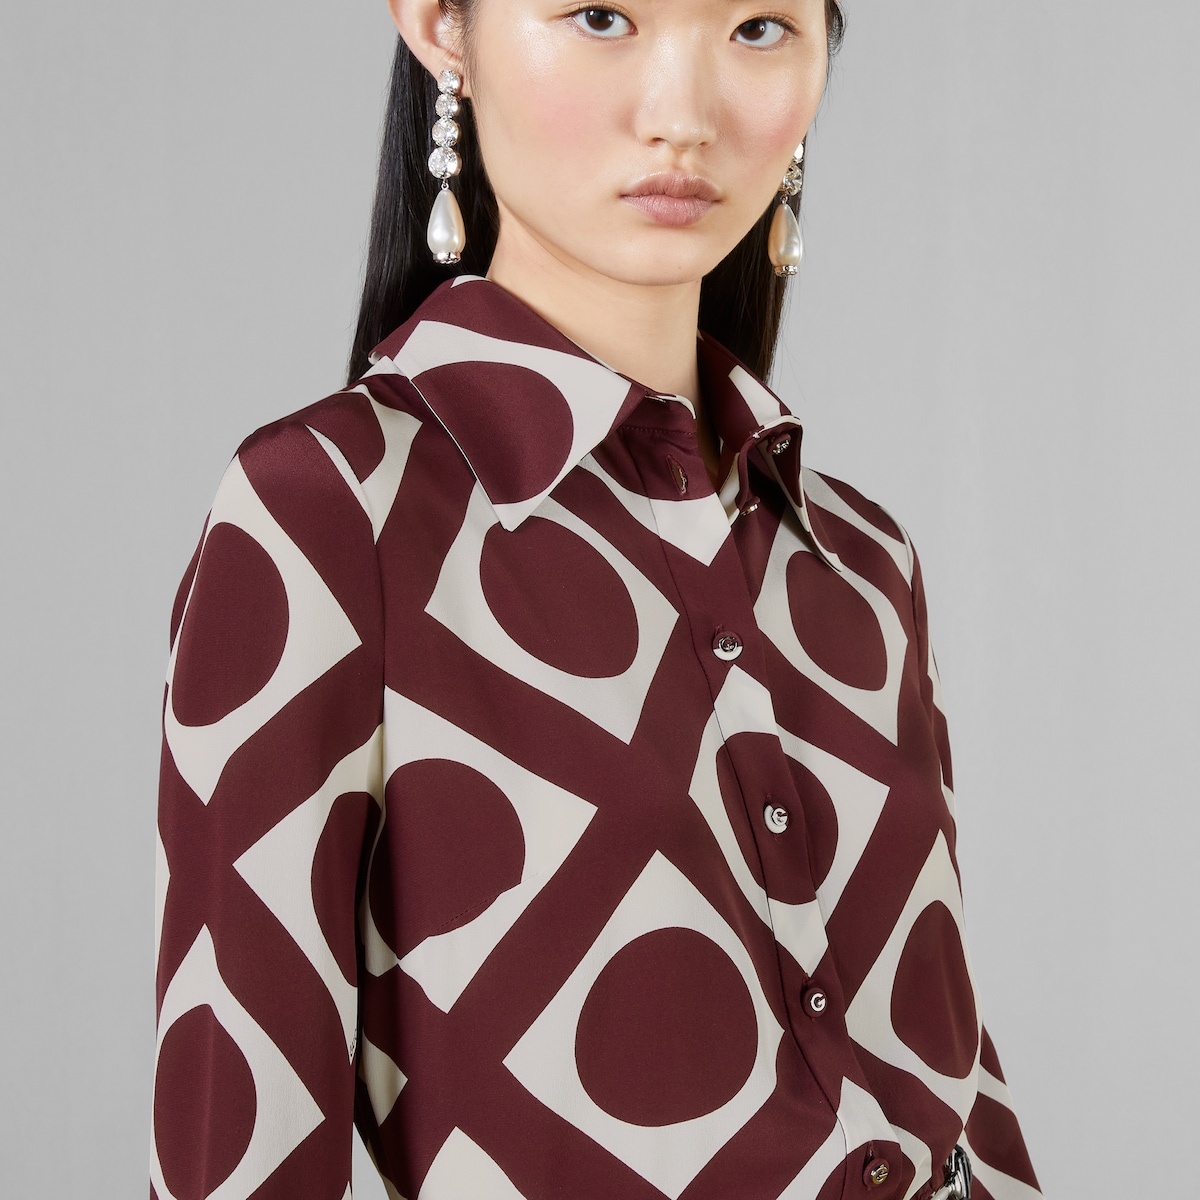 Optical print silk shirt in dark red and ivory